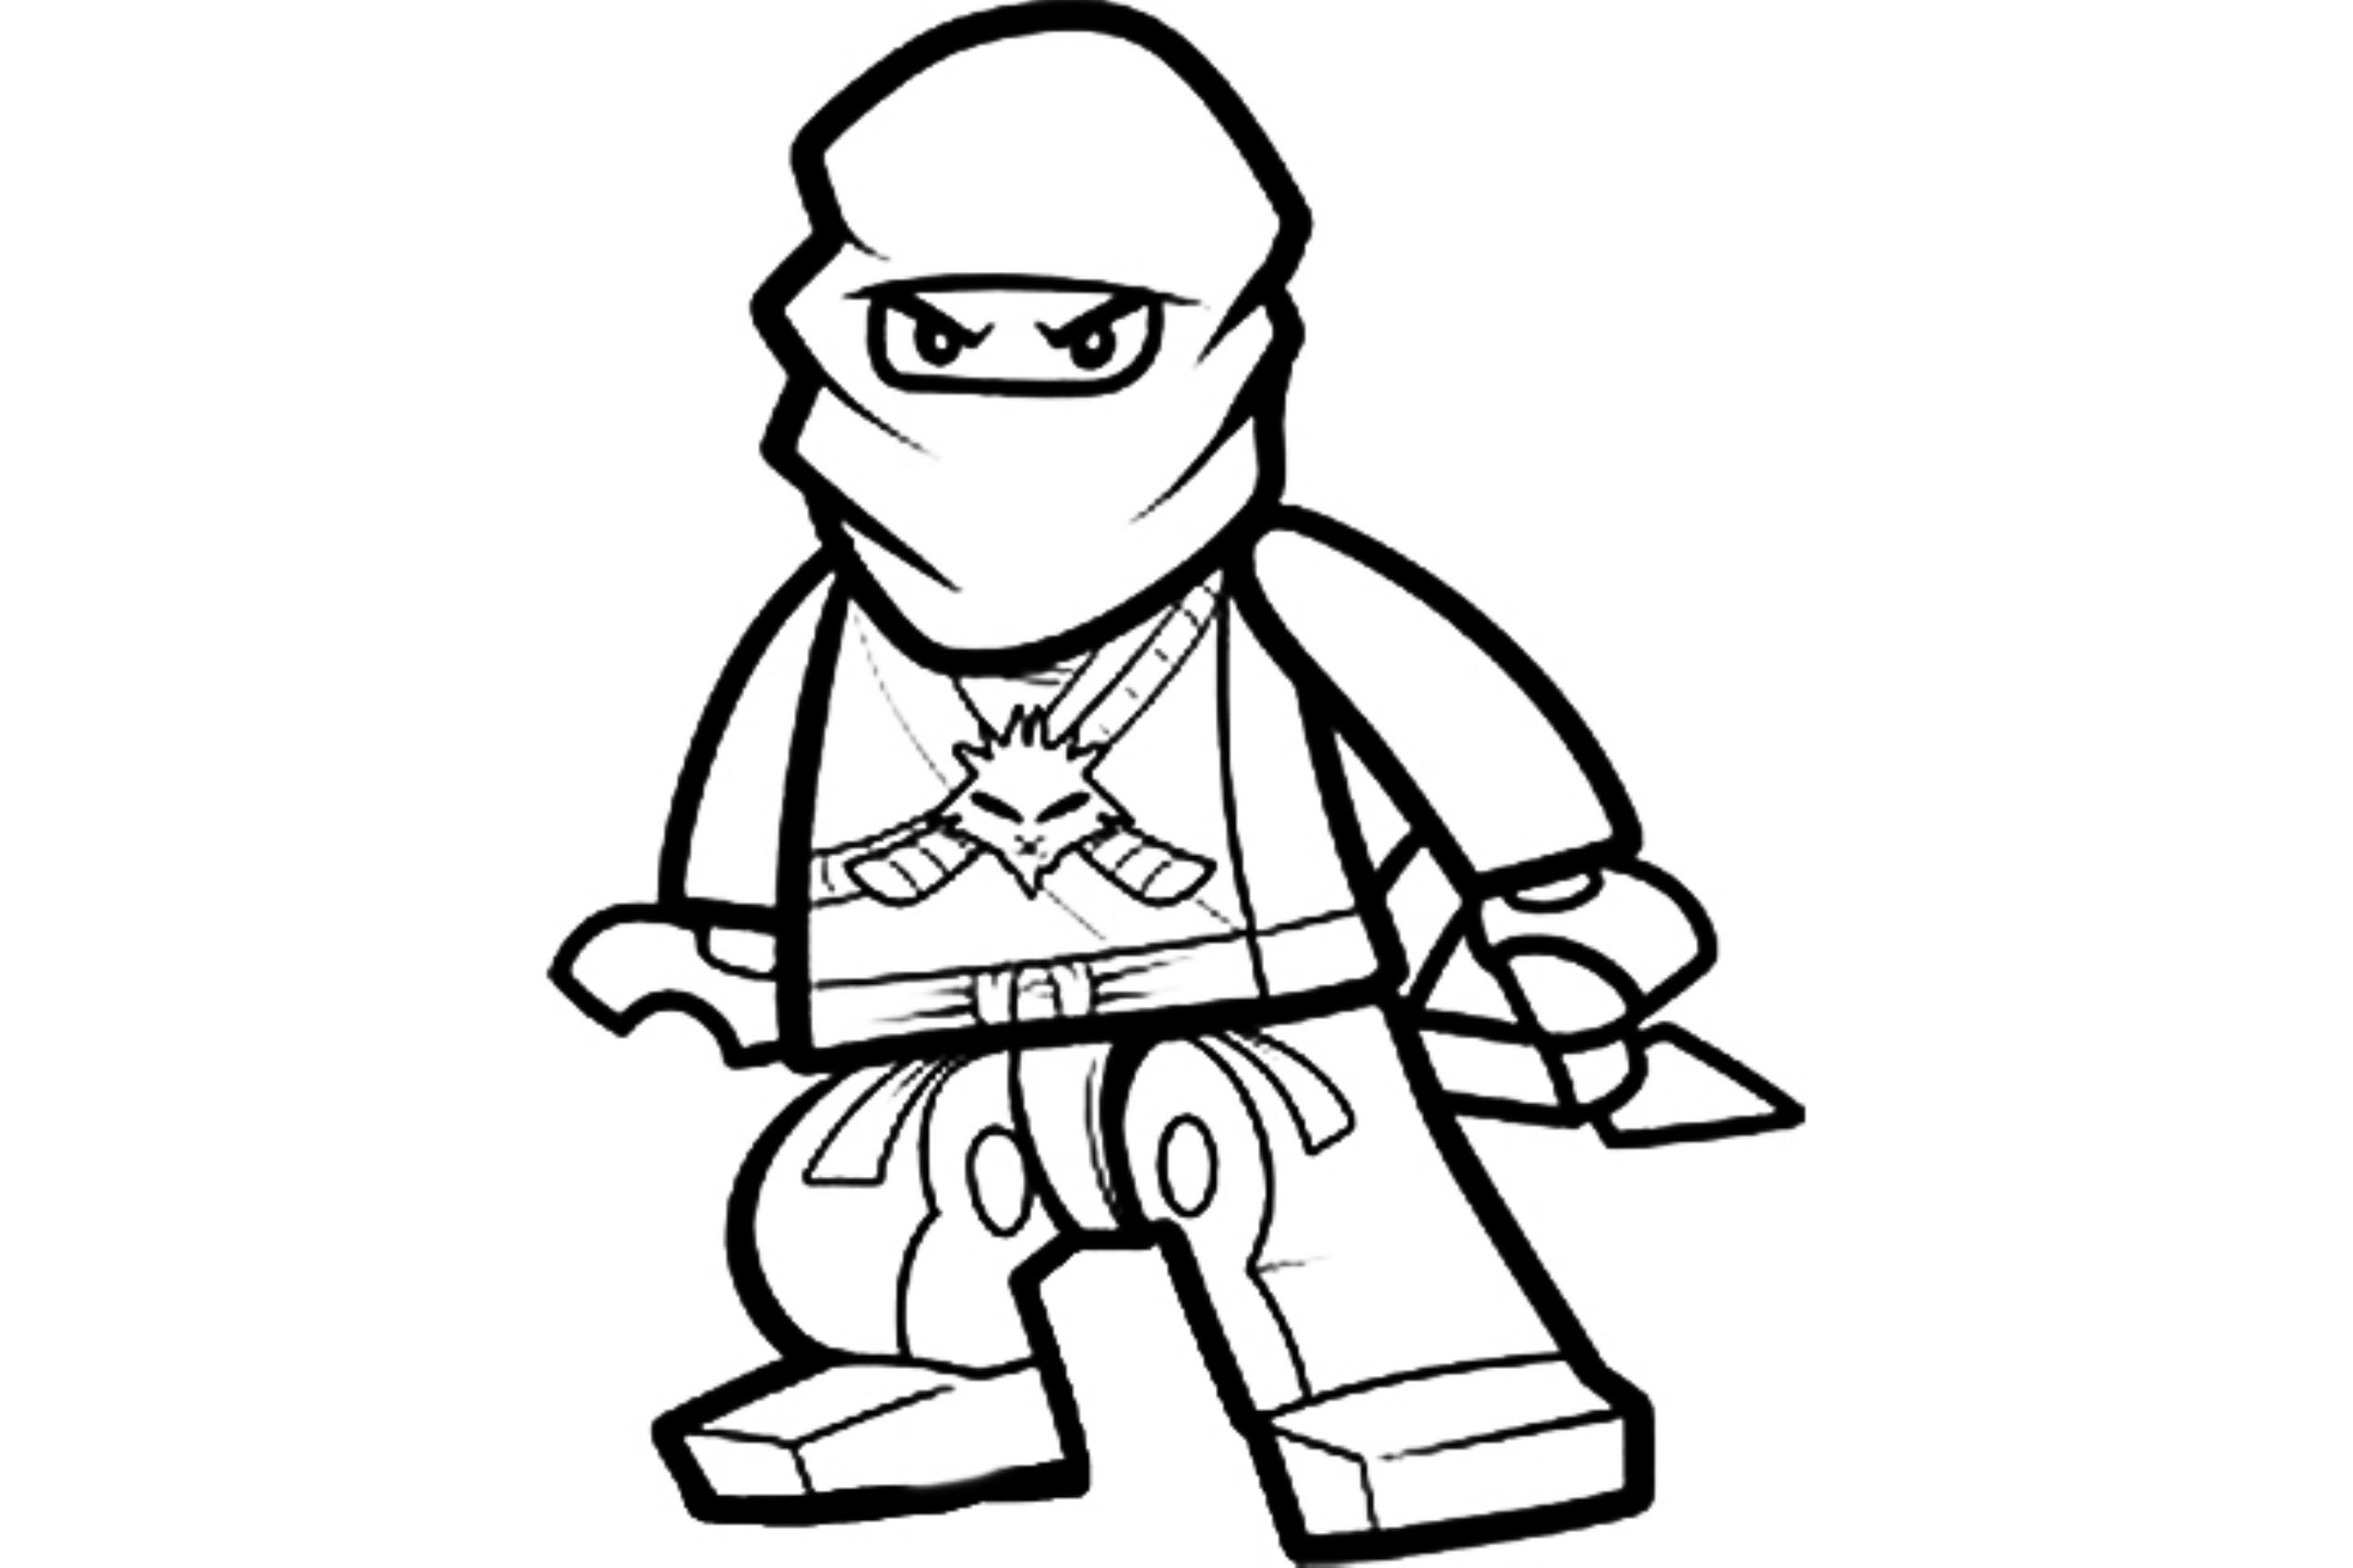 Ninja Coloring Pages For Kids
 Ninja Coloring Pages coloringsuite